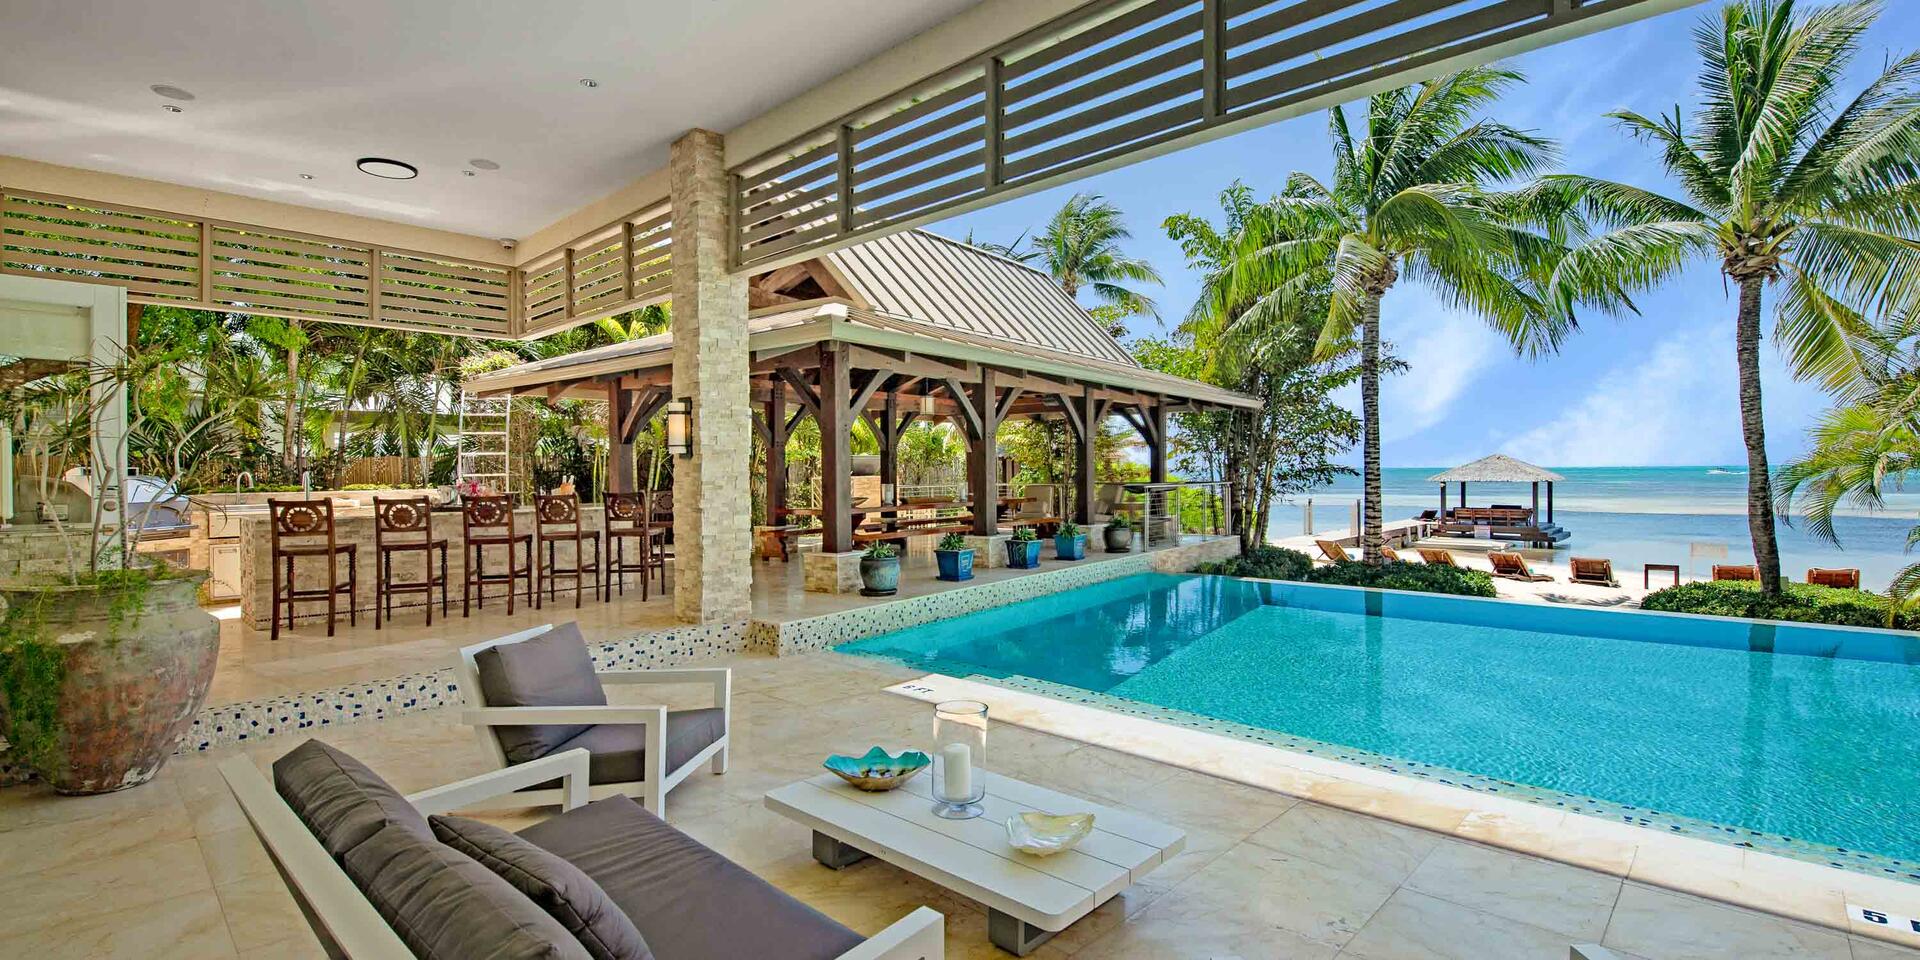 Property Image 1 - Majestic Villa with Barefoot Beach and Shallow Water